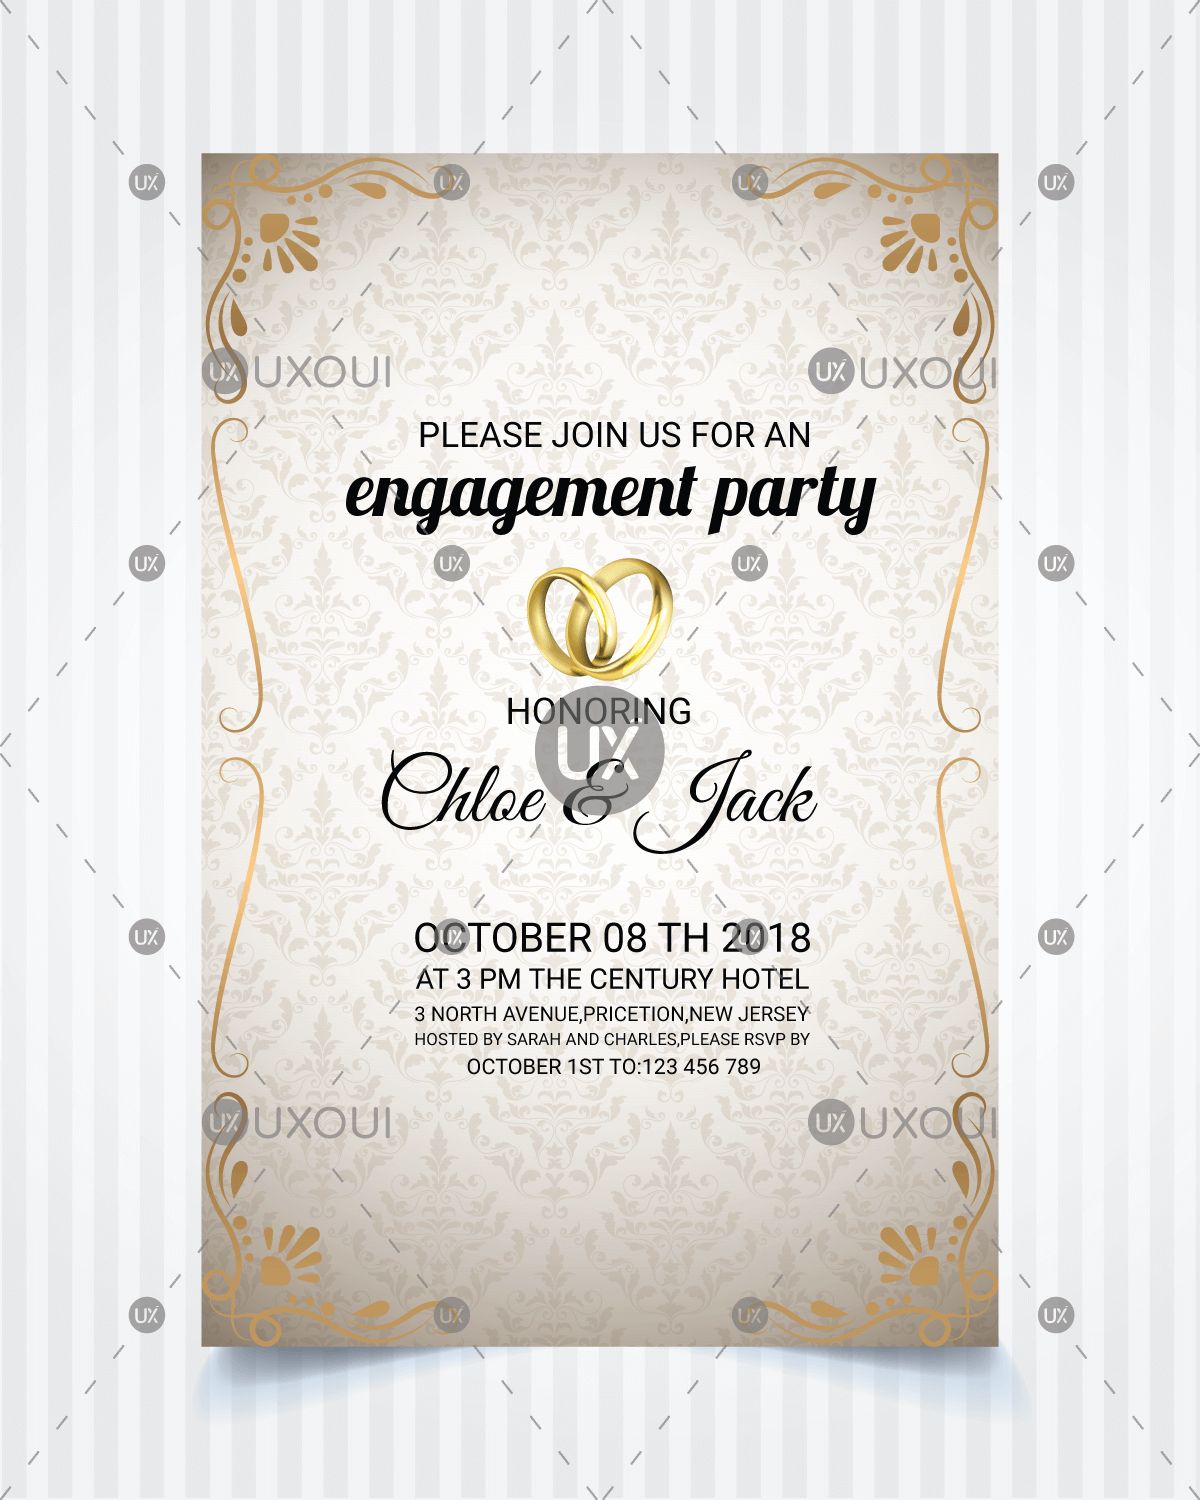 Vintage Style Wedding Engagement Party Invitation Card Template Design  Vector Within Engagement Invitation Card Template